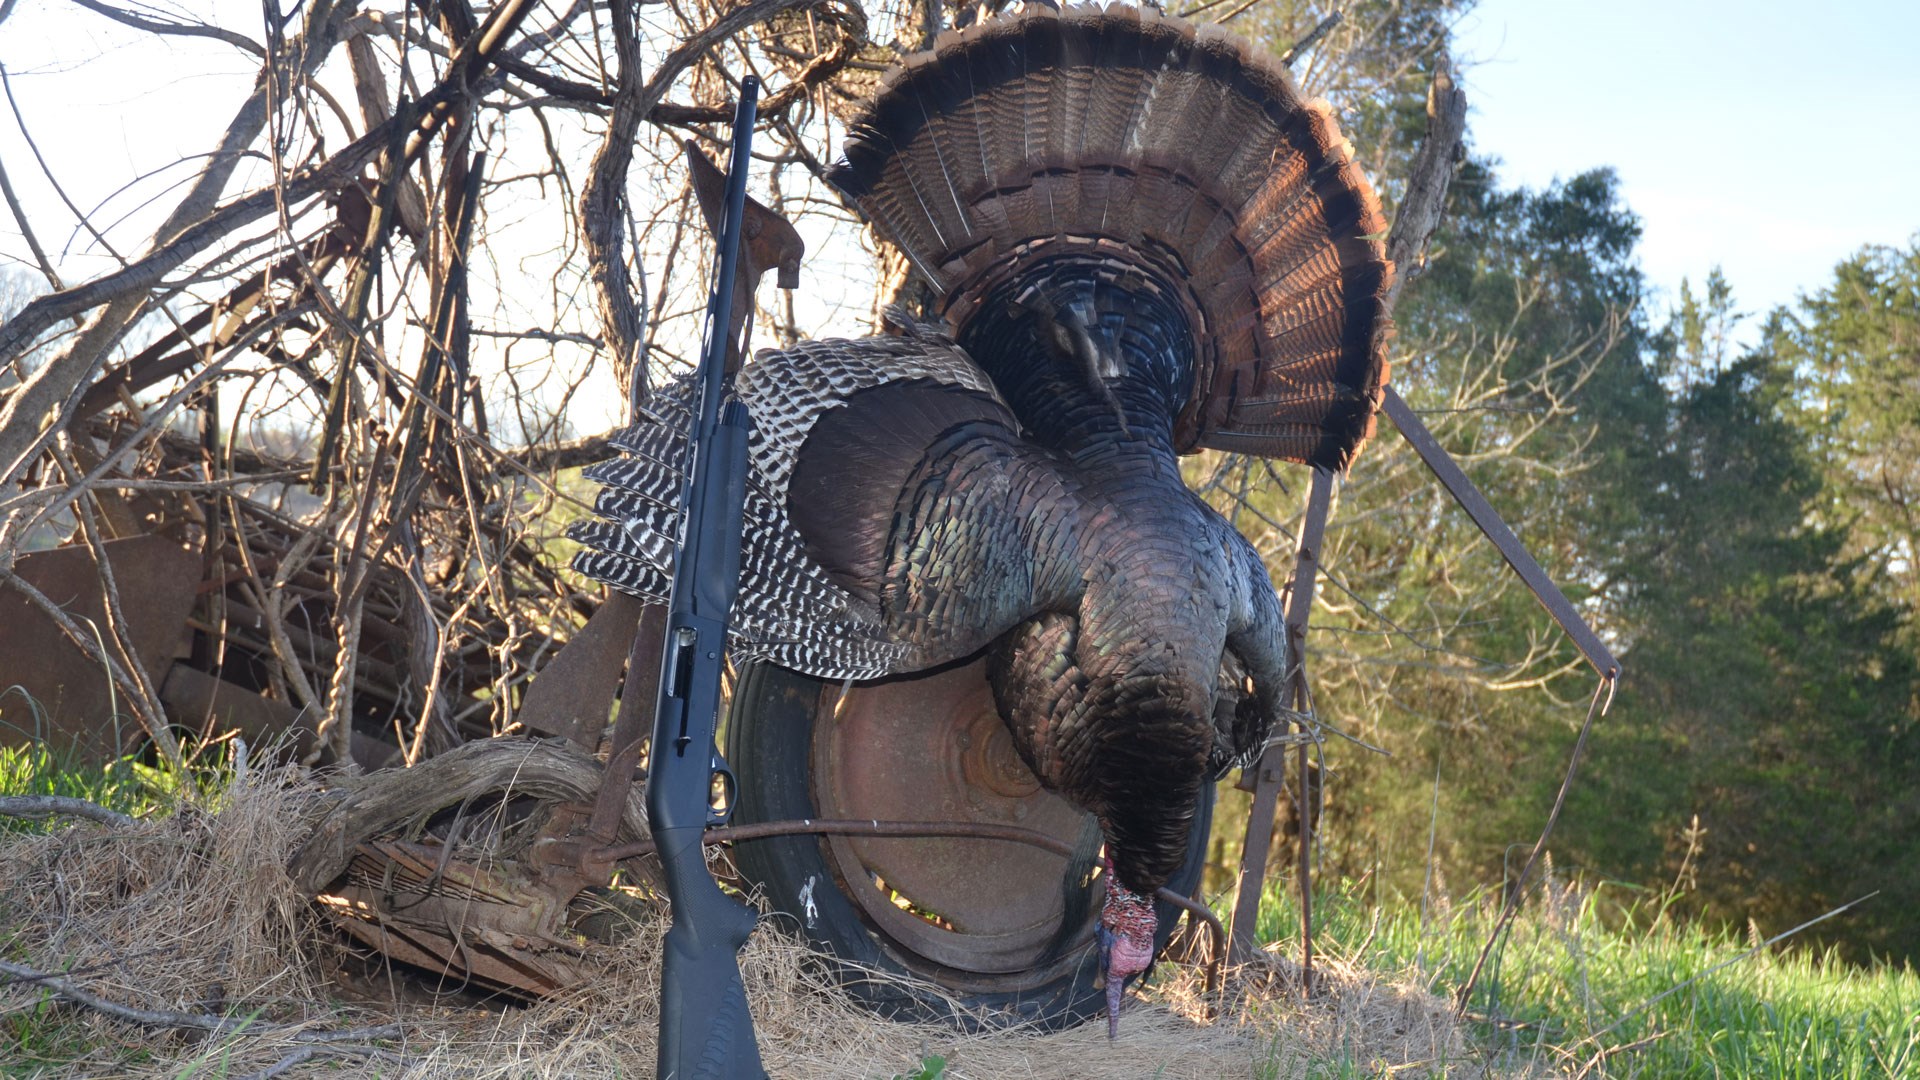 Gobbler in the golden sun, hanging on a wheel in a rustic setting